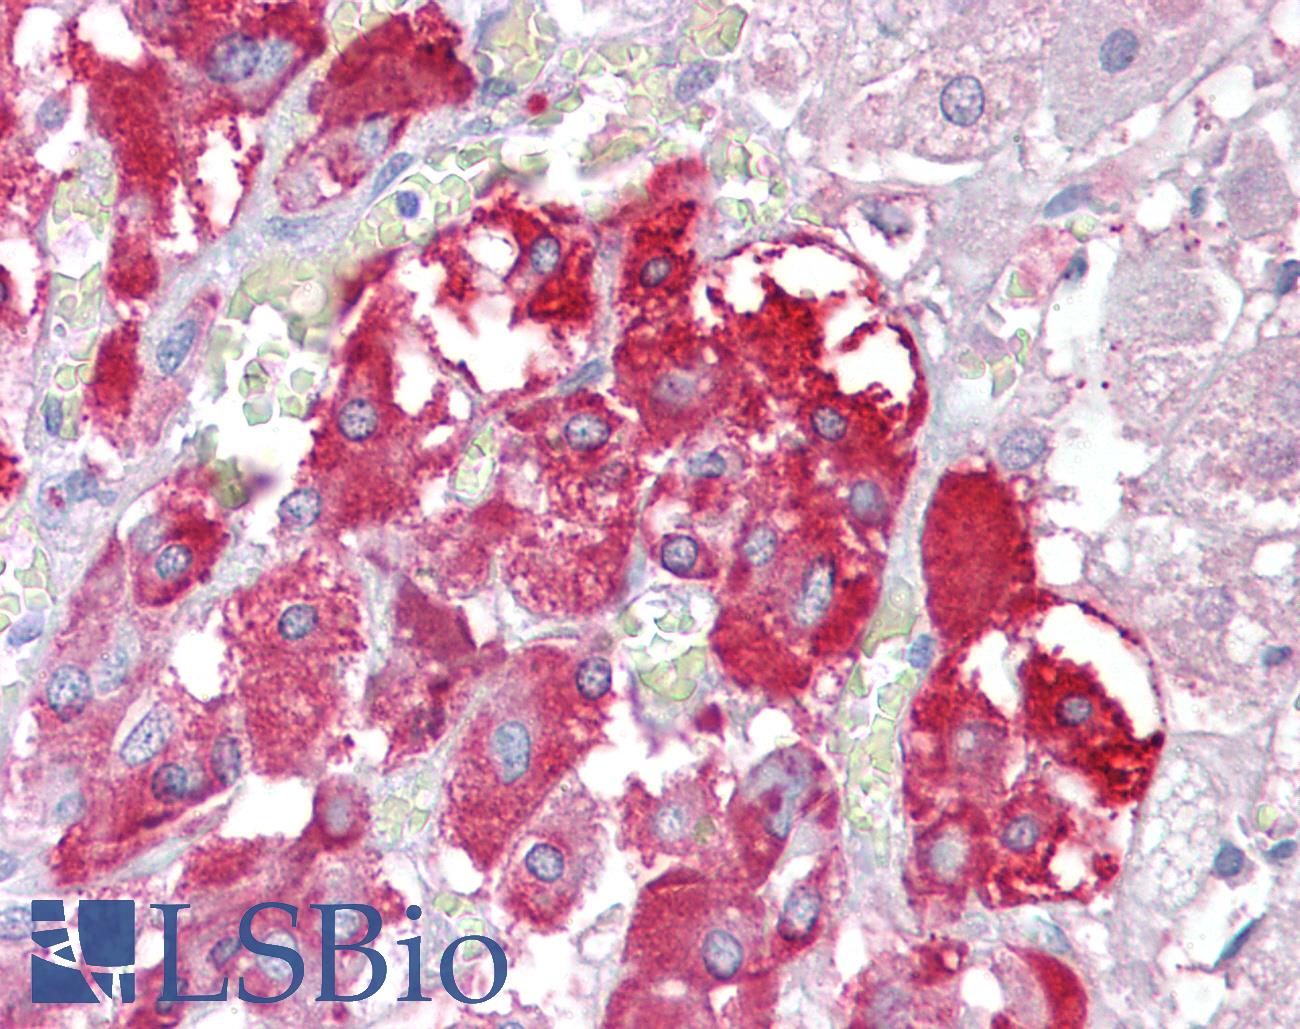 TPTE Antibody - Anti-TPTE antibody IHC of human adrenal. Immunohistochemistry of formalin-fixed, paraffin-embedded tissue after heat-induced antigen retrieval. Antibody concentration 2.5 ug/ml.